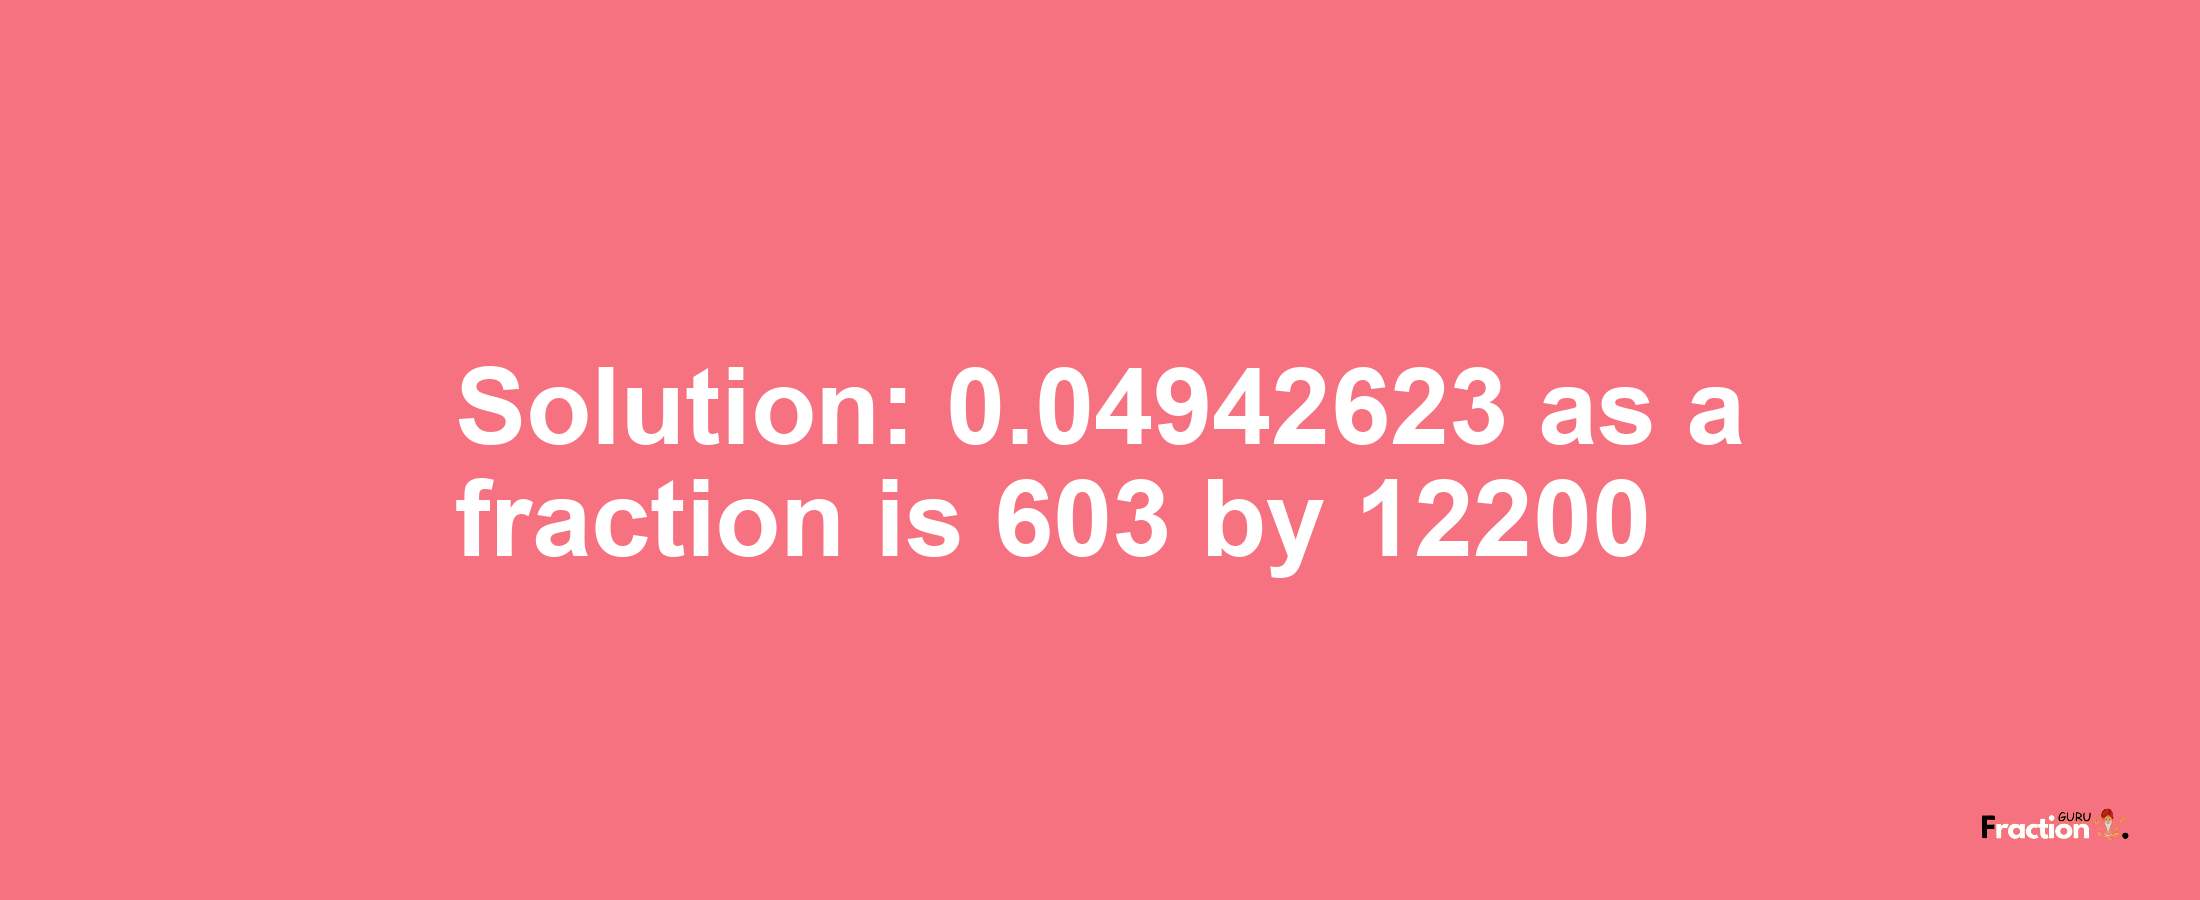 Solution:0.04942623 as a fraction is 603/12200